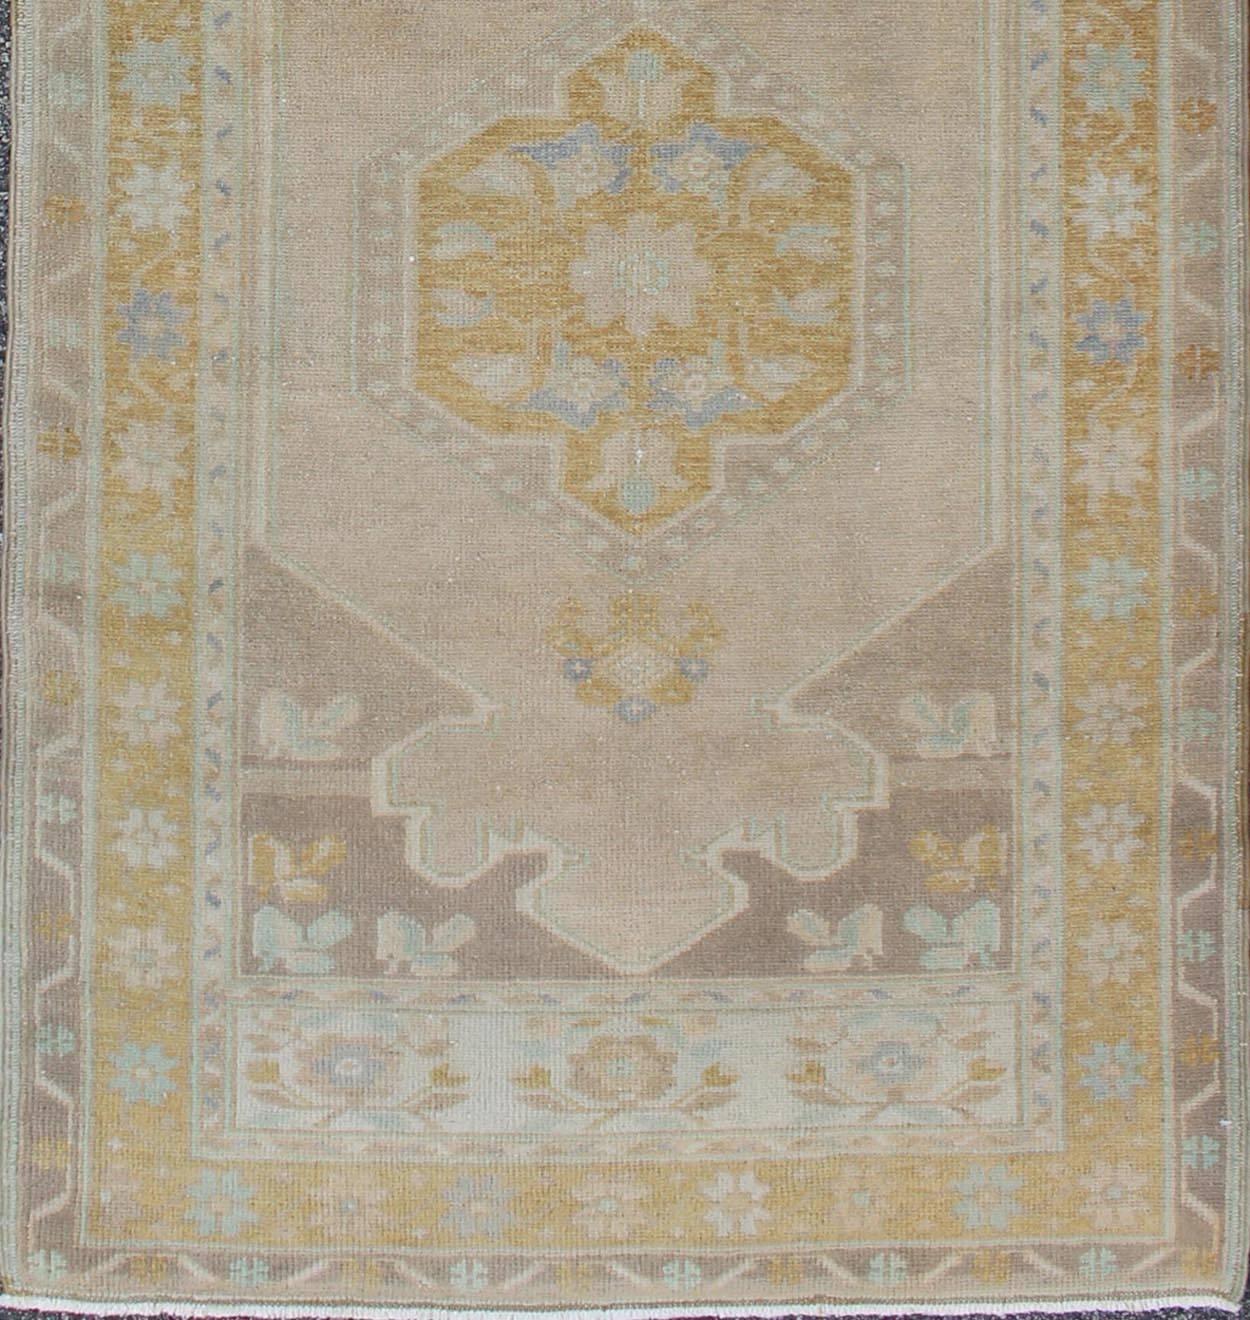  vintage Turkish Oushak runner with floral medallions, rug en-140350, country of origin / type: Turkey / Oushak, circa 1940.

This vintage Oushak runner features a unique blend of cheerful colors and an intricately beautiful design. The floral